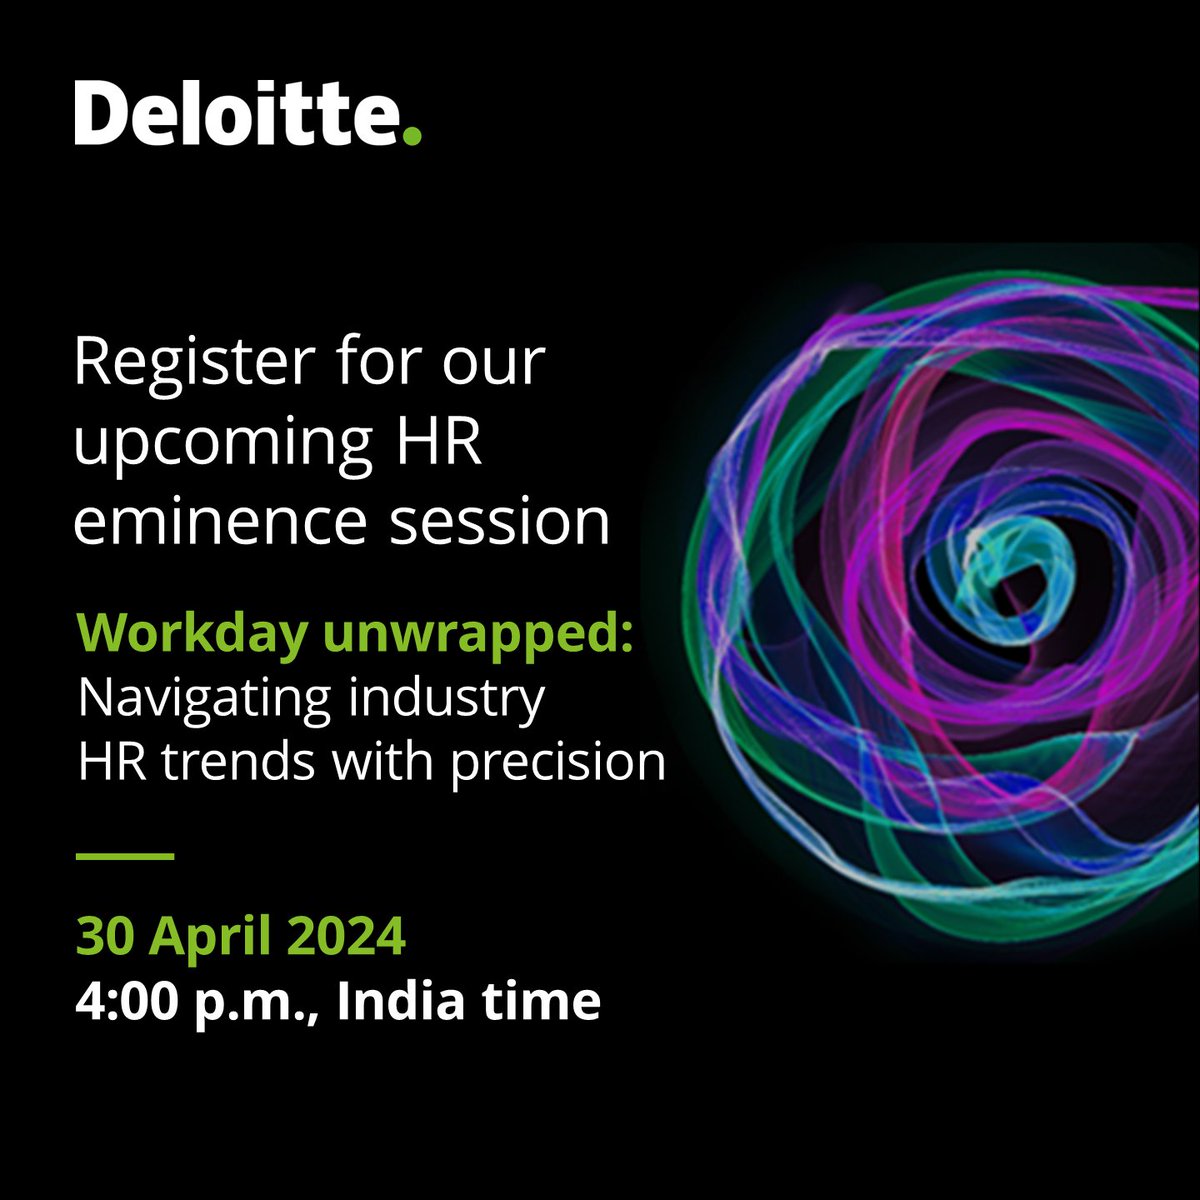 On 30 April 2024 we're hosting an HR eminence session titled 'Workday unwrapped: Navigating industry HR trends with precision.'
Join us for an insightful discussion on the latest HR trends.

Register: deloi.tt/4aAniVj
#HR #FutureOfHR #WorkdayUnwrapped #HRtrends